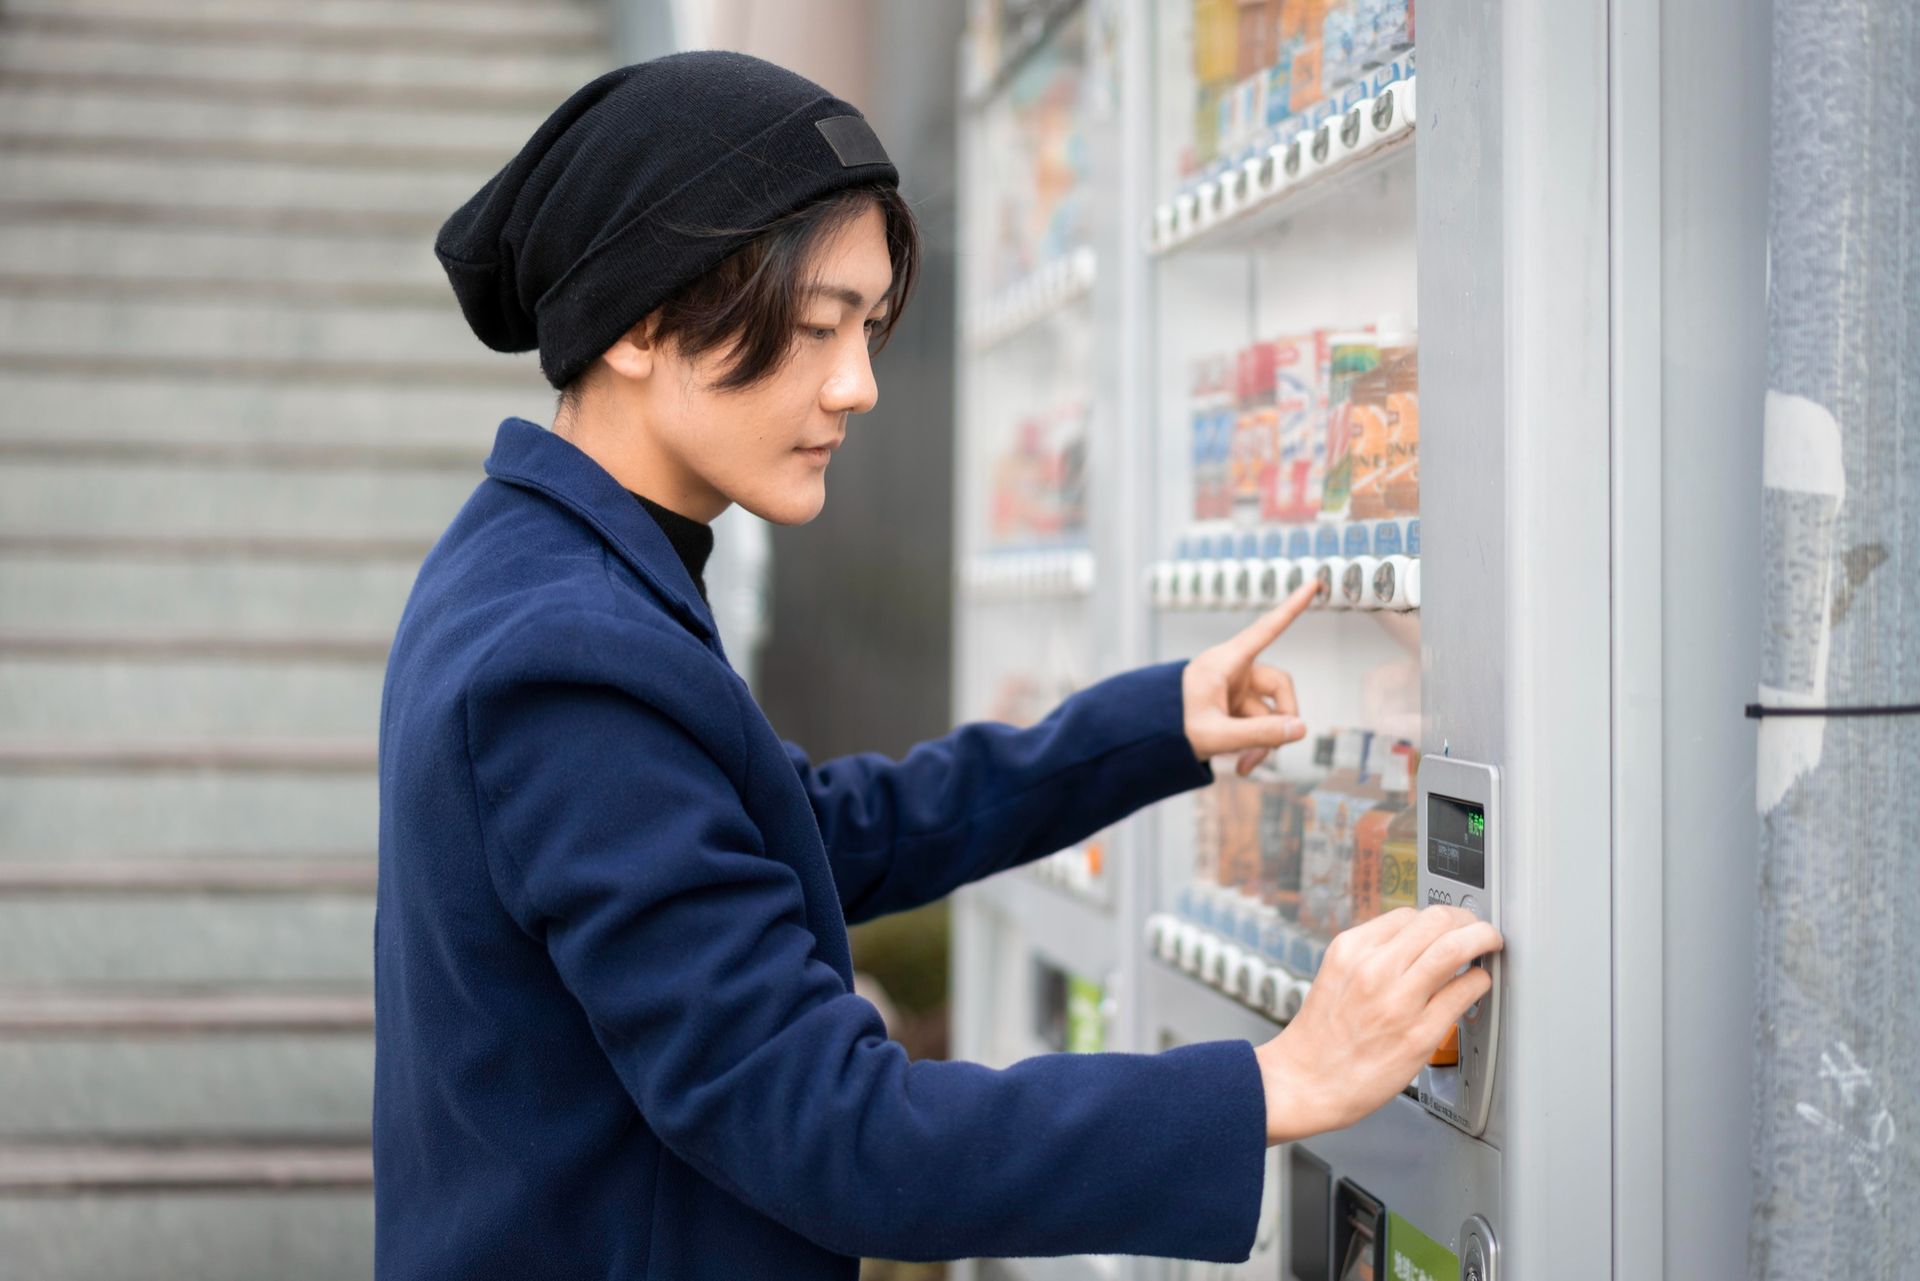 a man is using a vending machine to buy a drink .